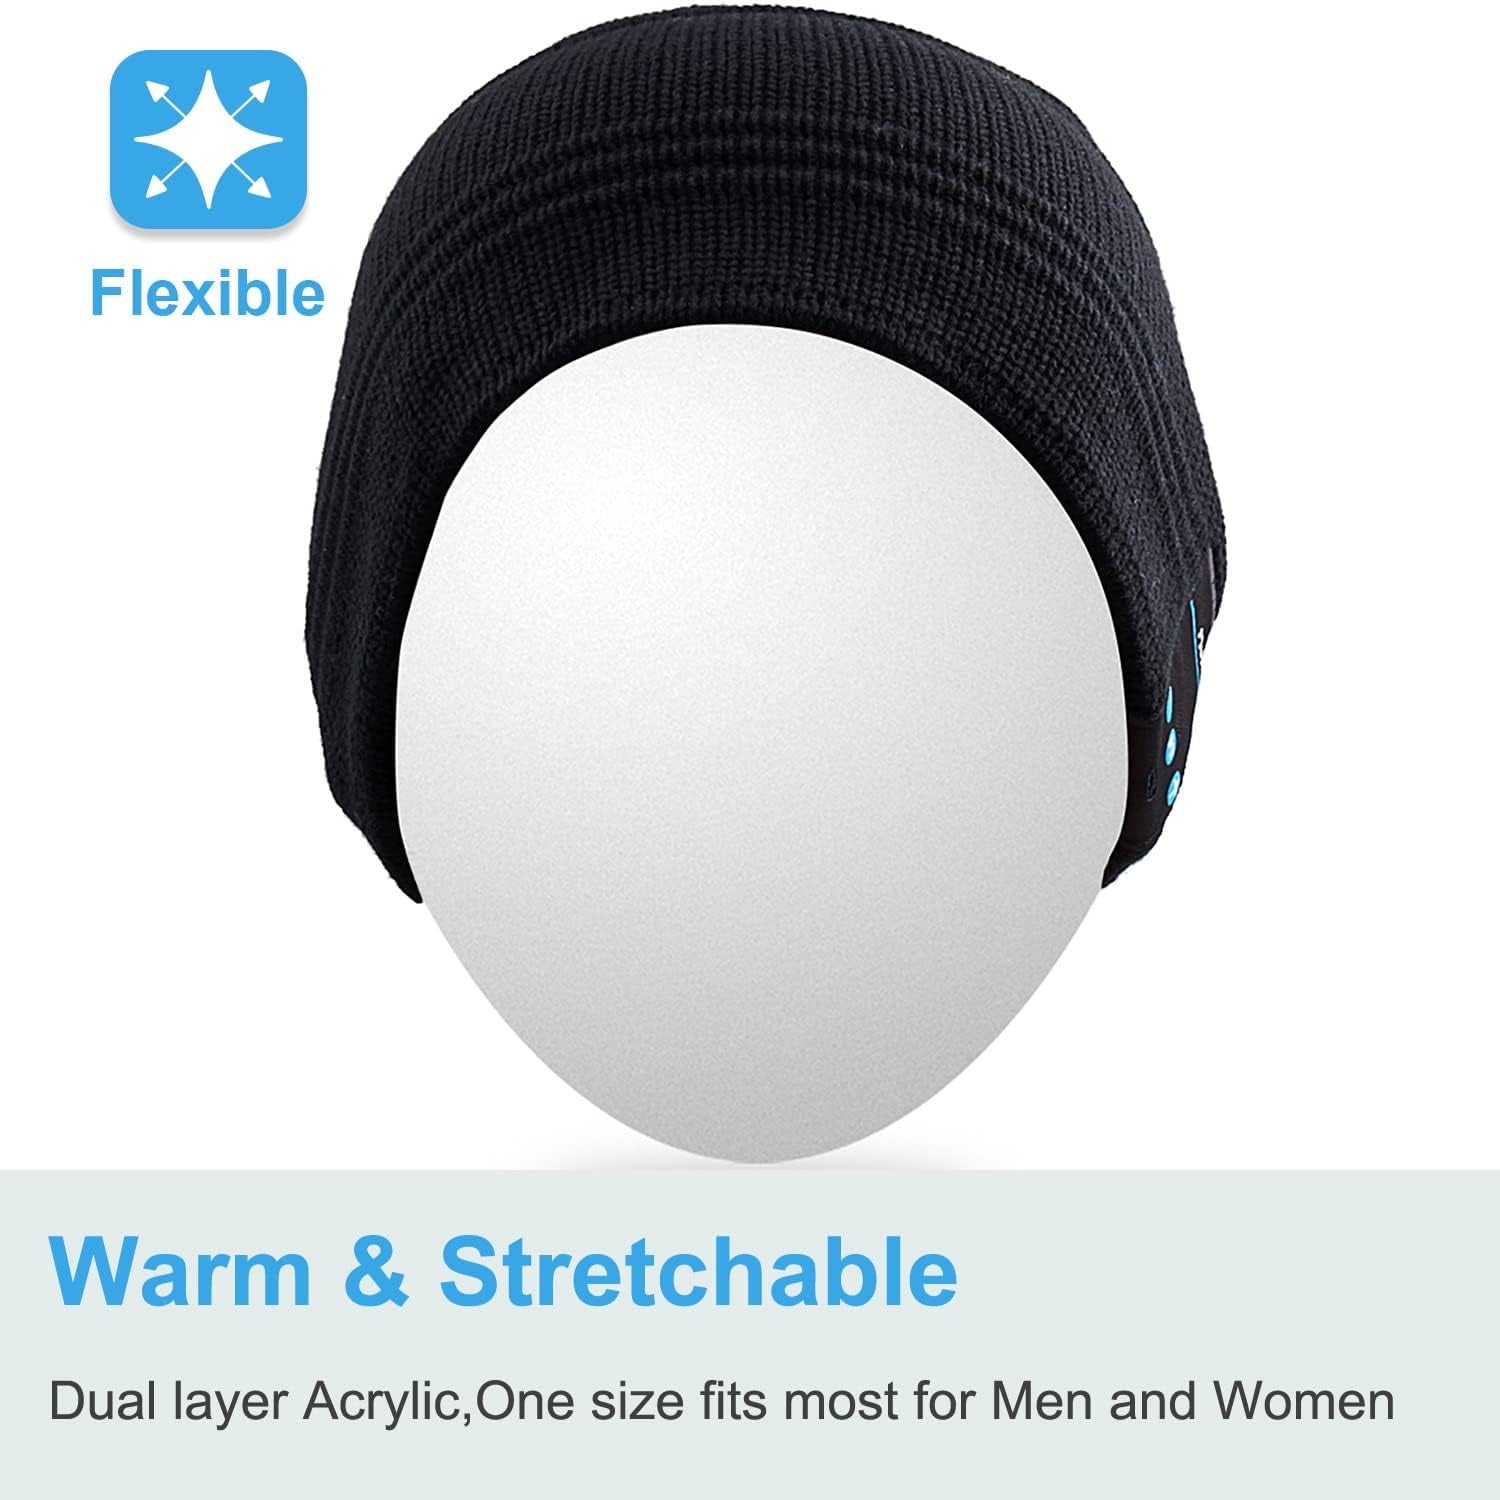 Bluetooth Beanie Hat Wireless Headphone for Outdoor Sports Xmas Gifts